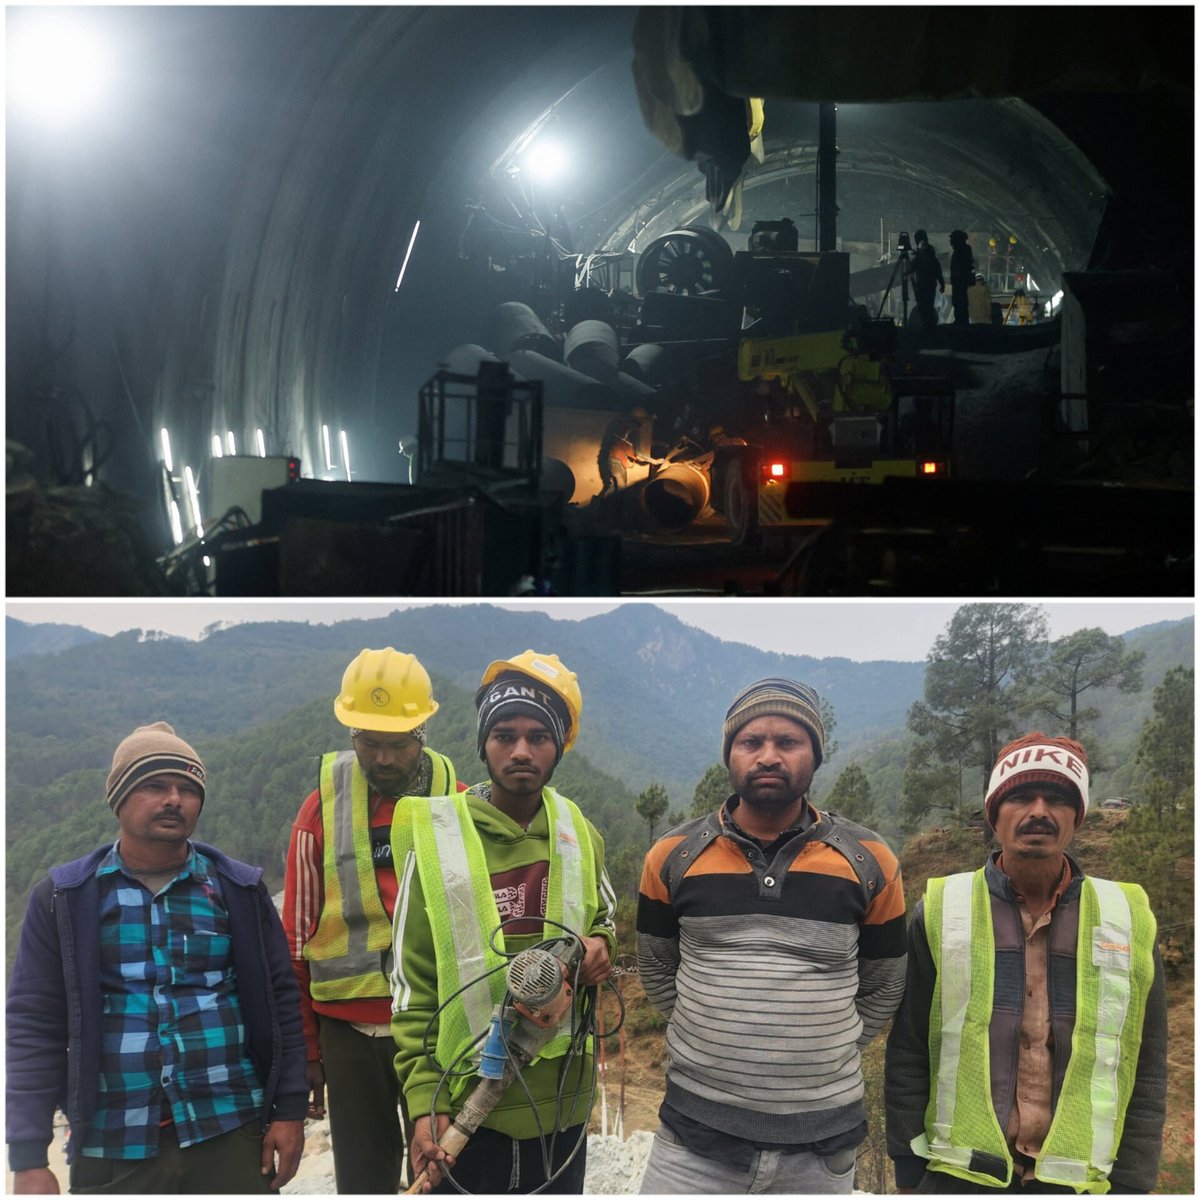 Six rat-hole miners embark on a manual rescue mission in #UttarkashiTunnelCollapse. Facing challenges after machine complications, they aim to evacuate 41 trapped workers. Weather adds complexity.
Read more at- shorts91.com/category/india
#UttarkashiRescue #RatHoleMiners #Uttarakhand